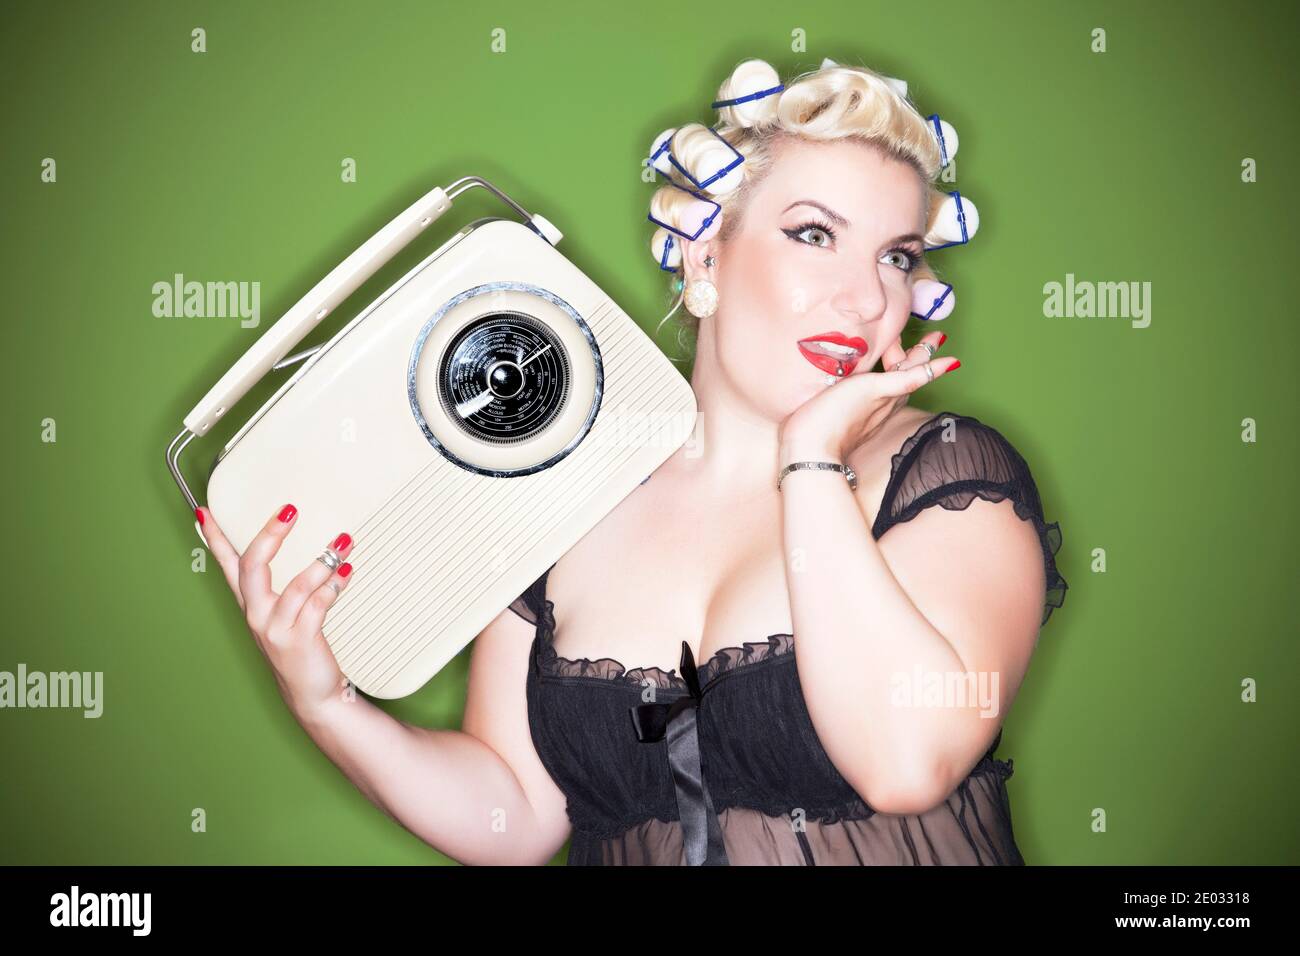 Portrait of a vintage styled housewife with old Radio Stock Photo